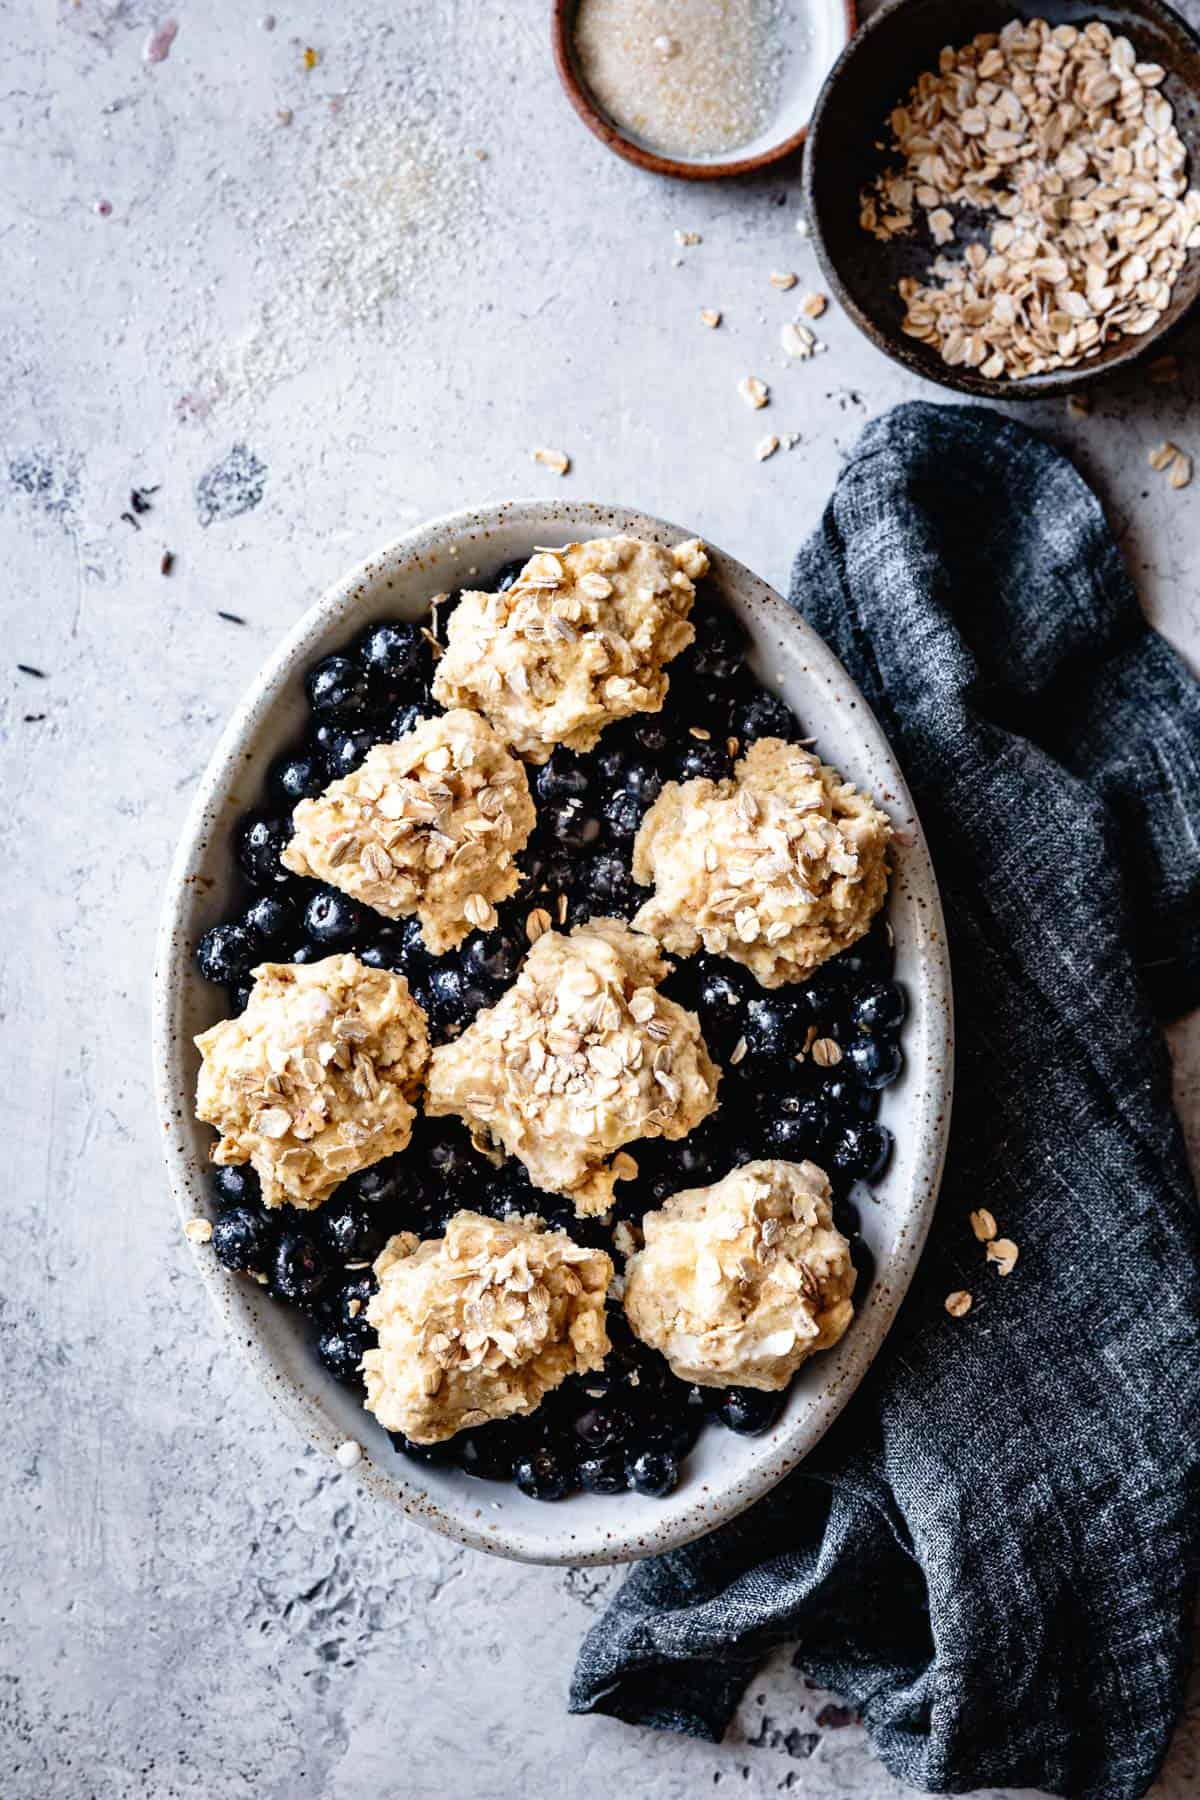 Gluten-Free dairy-free blueberry cobbler with oatmeal topping before baking